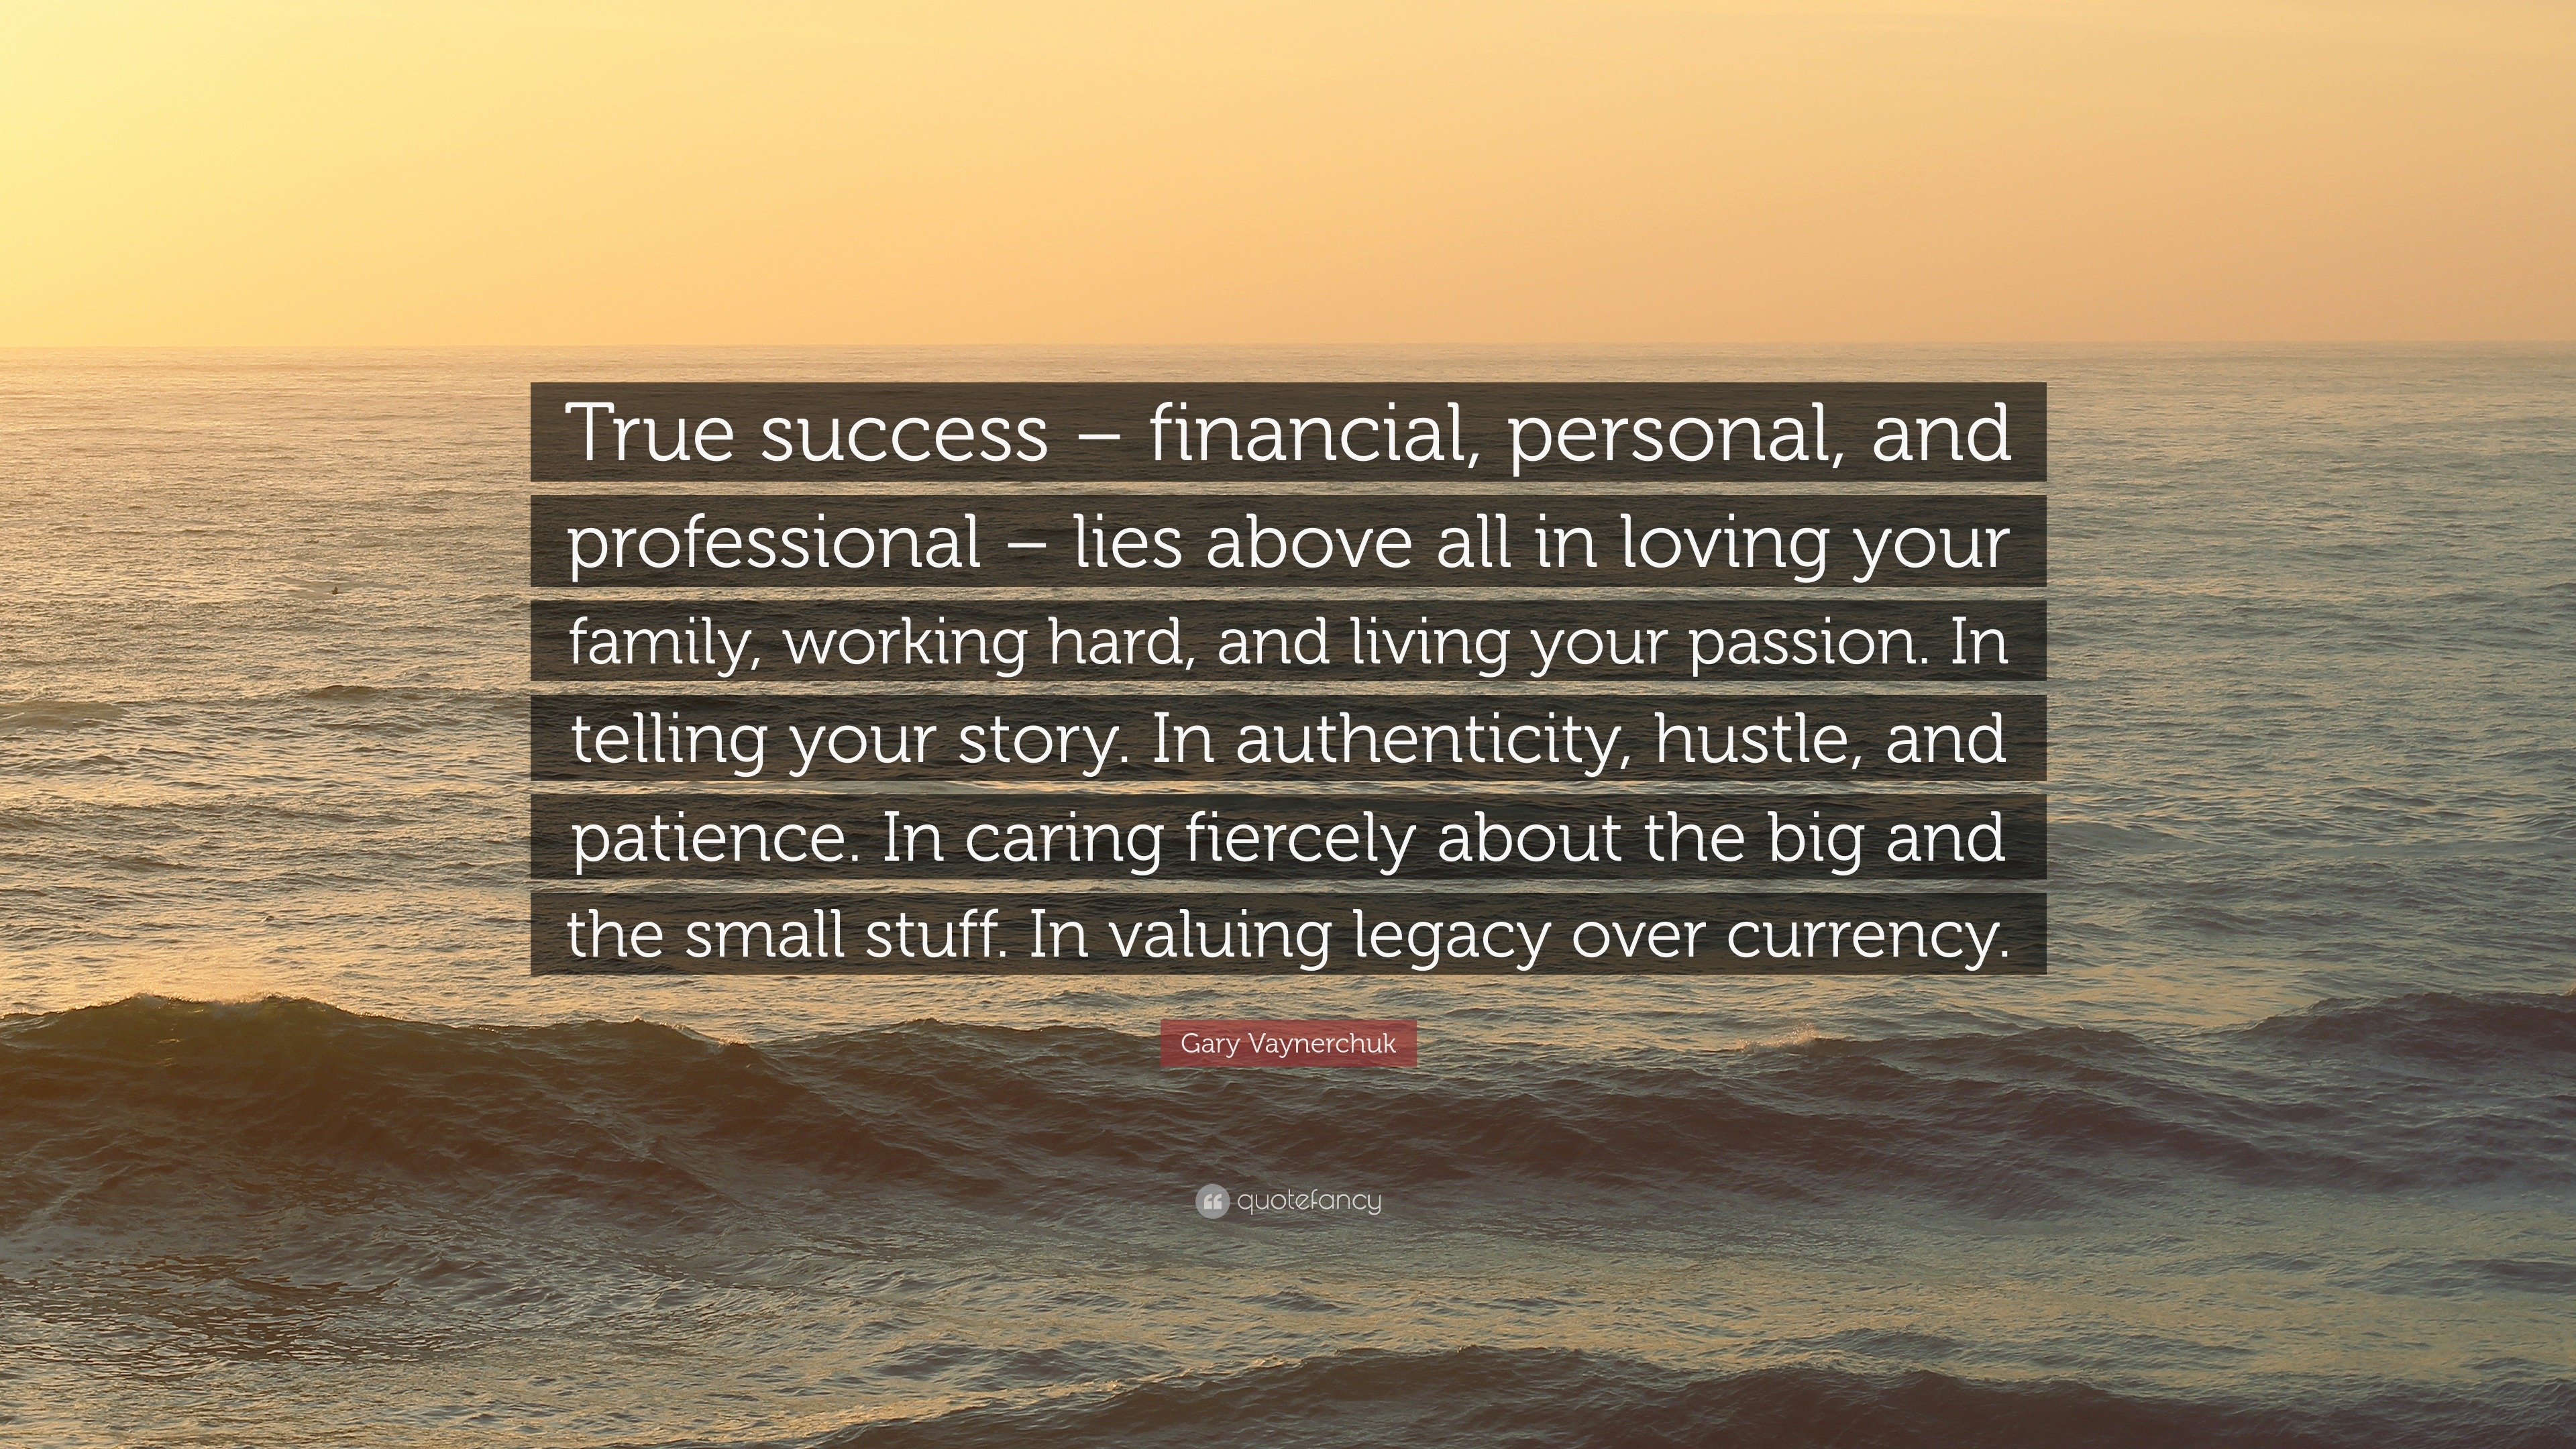 Gary Vaynerchuk Quote “True success – financial personal and professional – lies